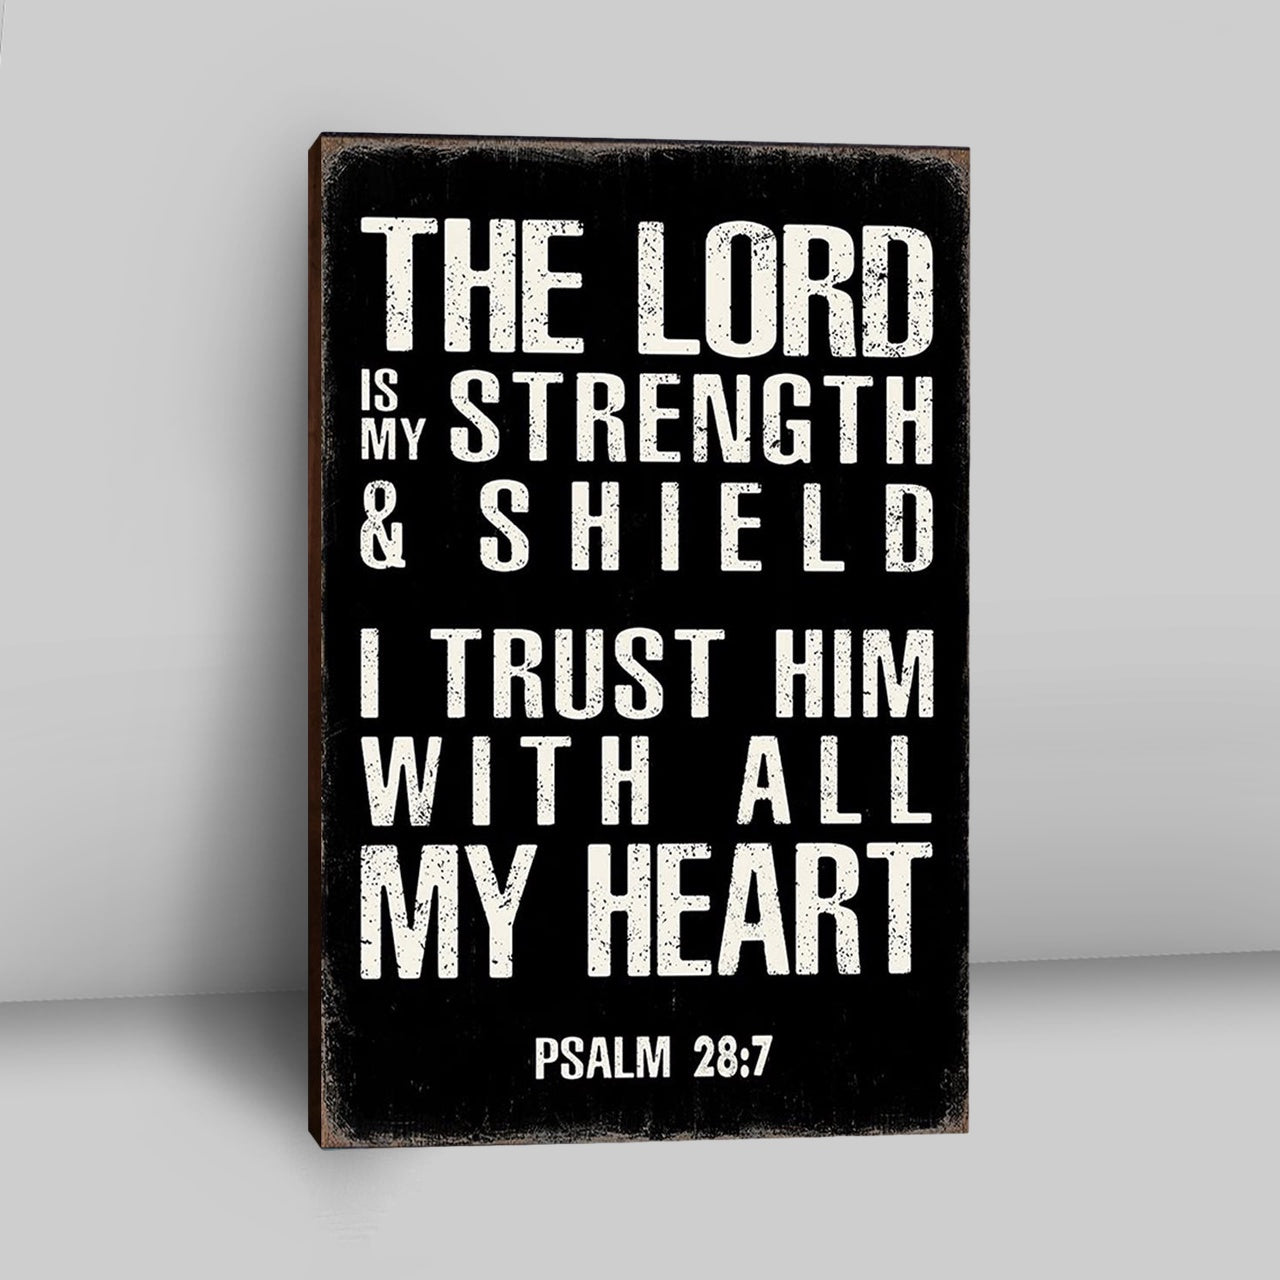 Psalm 28 7 - The Lord Is Strength & Shield Canvas Wall Art - I Trust Him With All My Heart - Christian Canvas Wall Art Decor